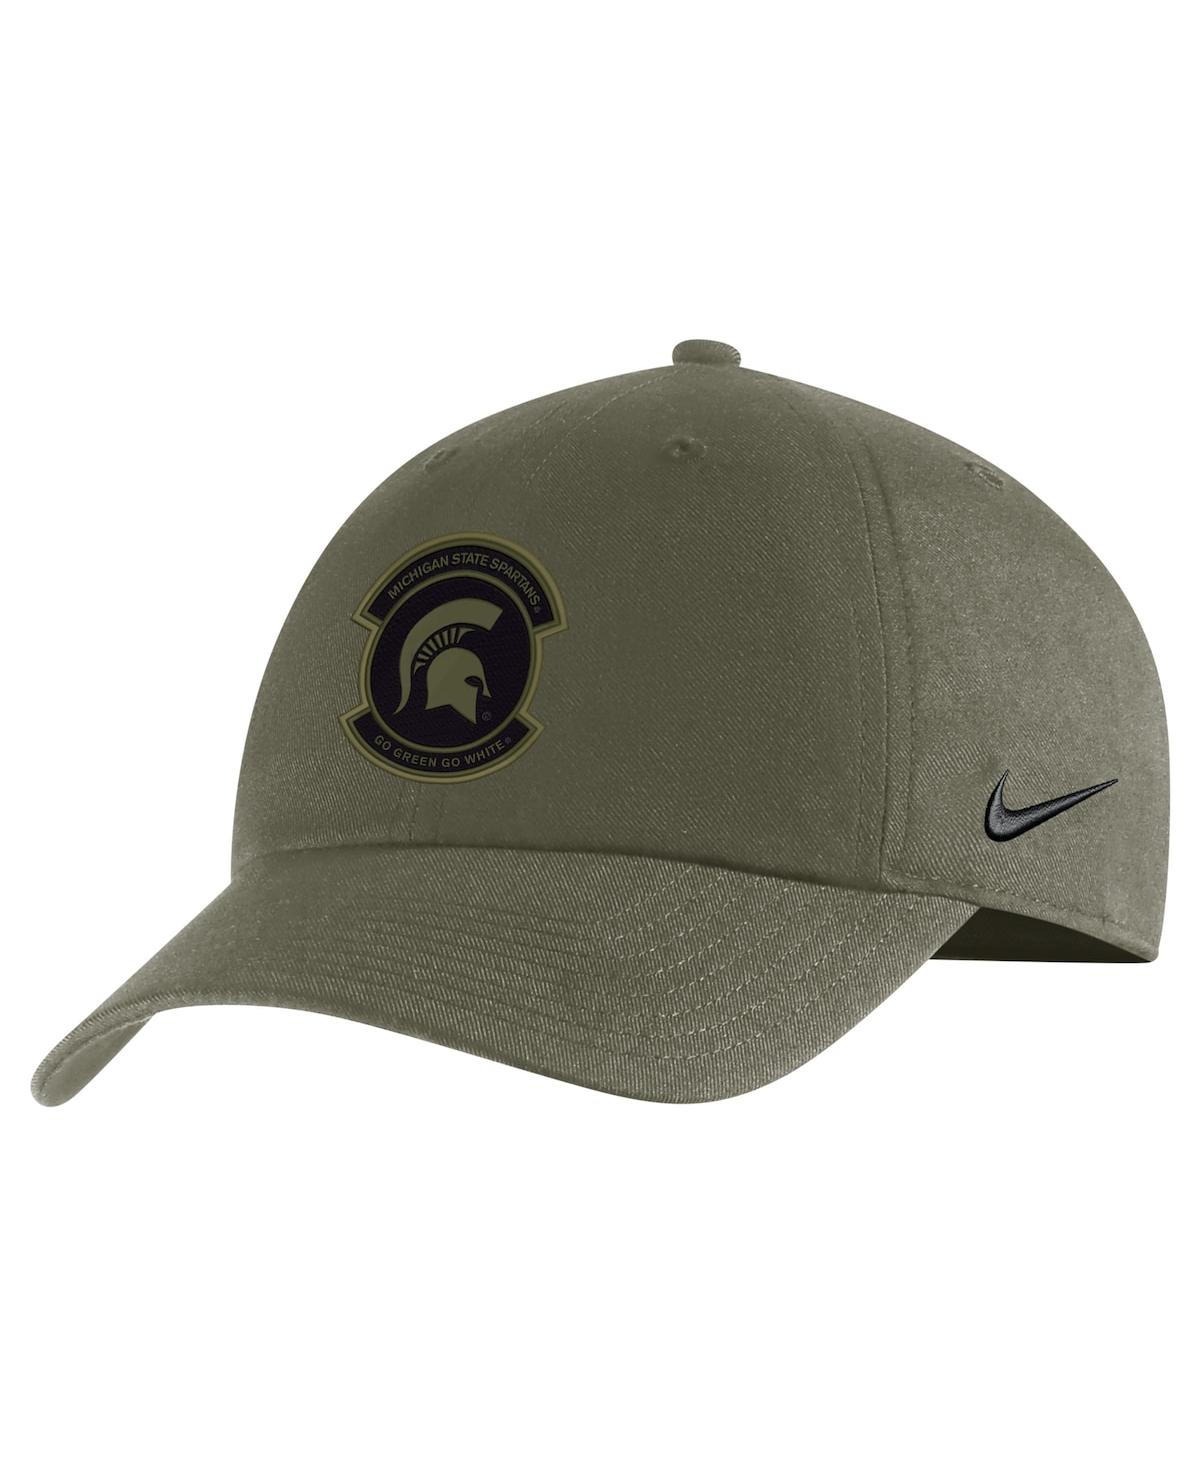 NIKE MEN'S NIKE OLIVE MICHIGAN STATE SPARTANS MILITARY-INSPIRED PACK HERITAGE86 ADJUSTABLE HAT